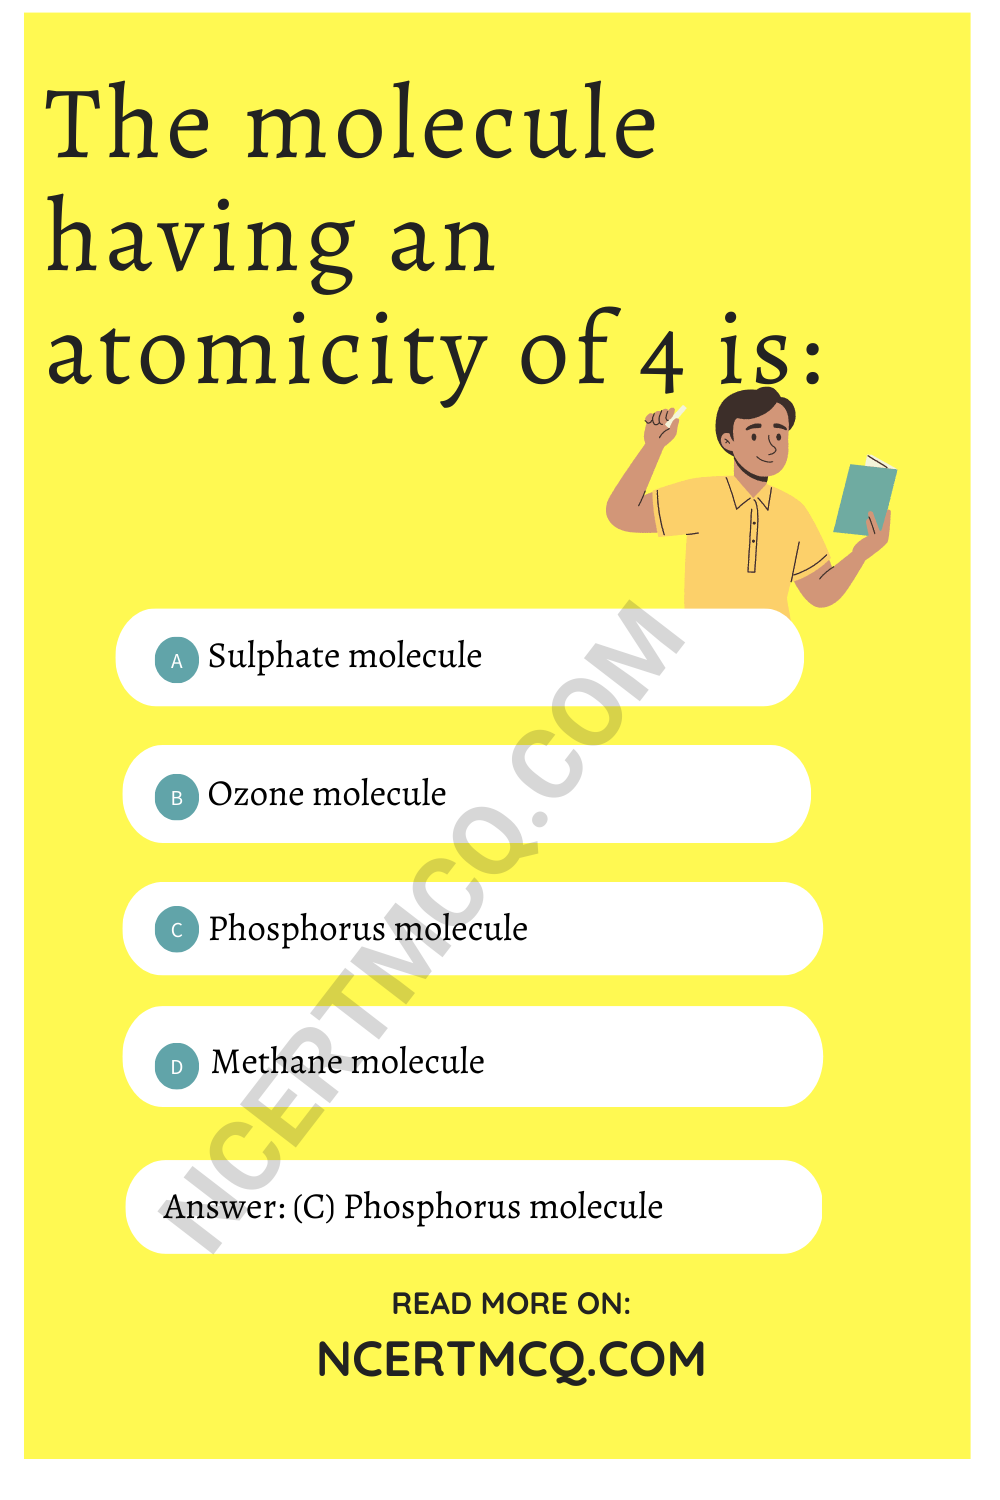 The molecule having an atomicity of 4 is: